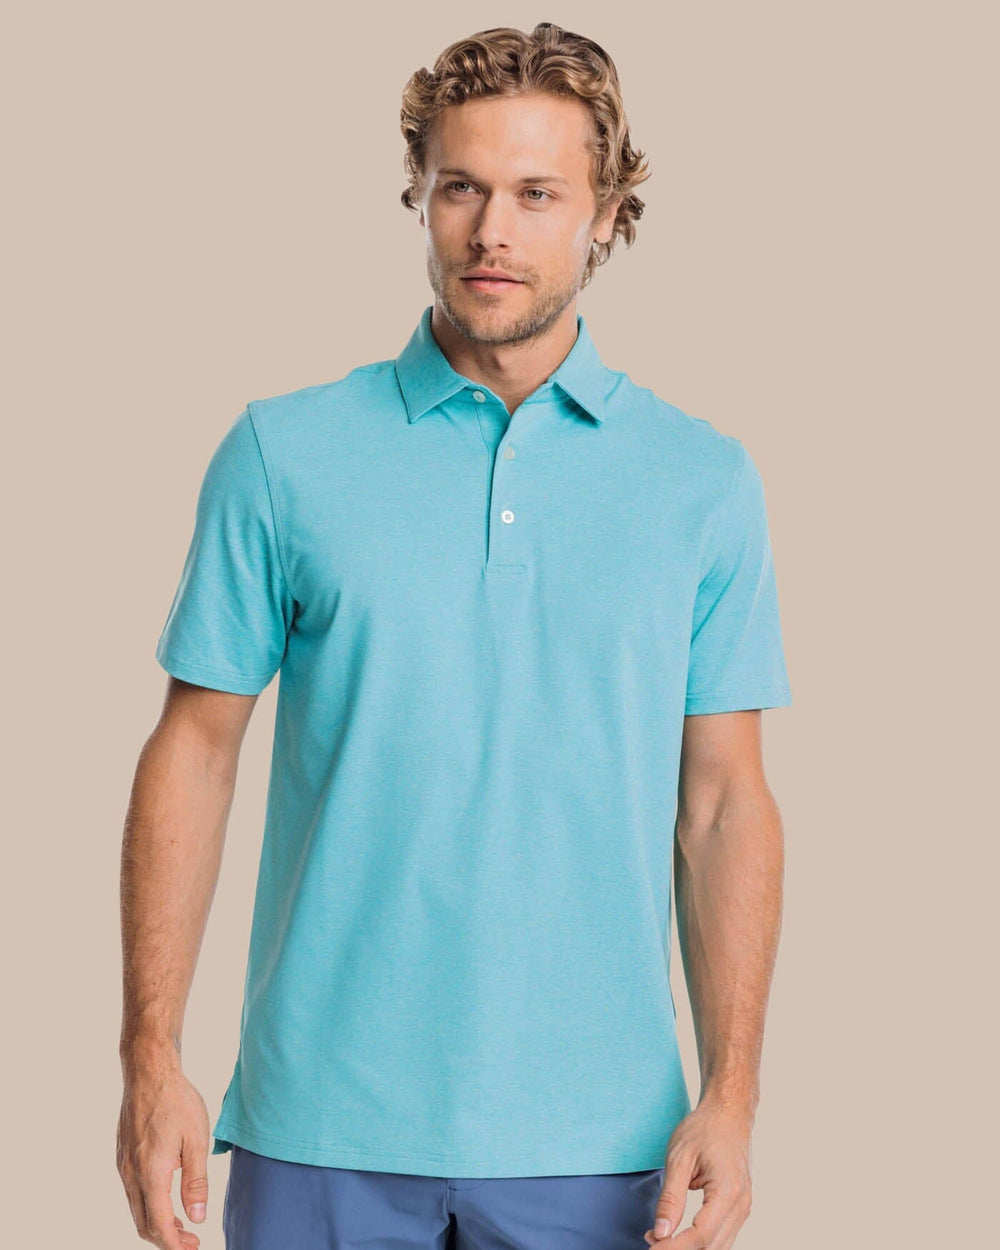 The front view of the brrr°®-eeze Heather Performance Polo Shirt by Southern Tide - Heather Tidal Wave